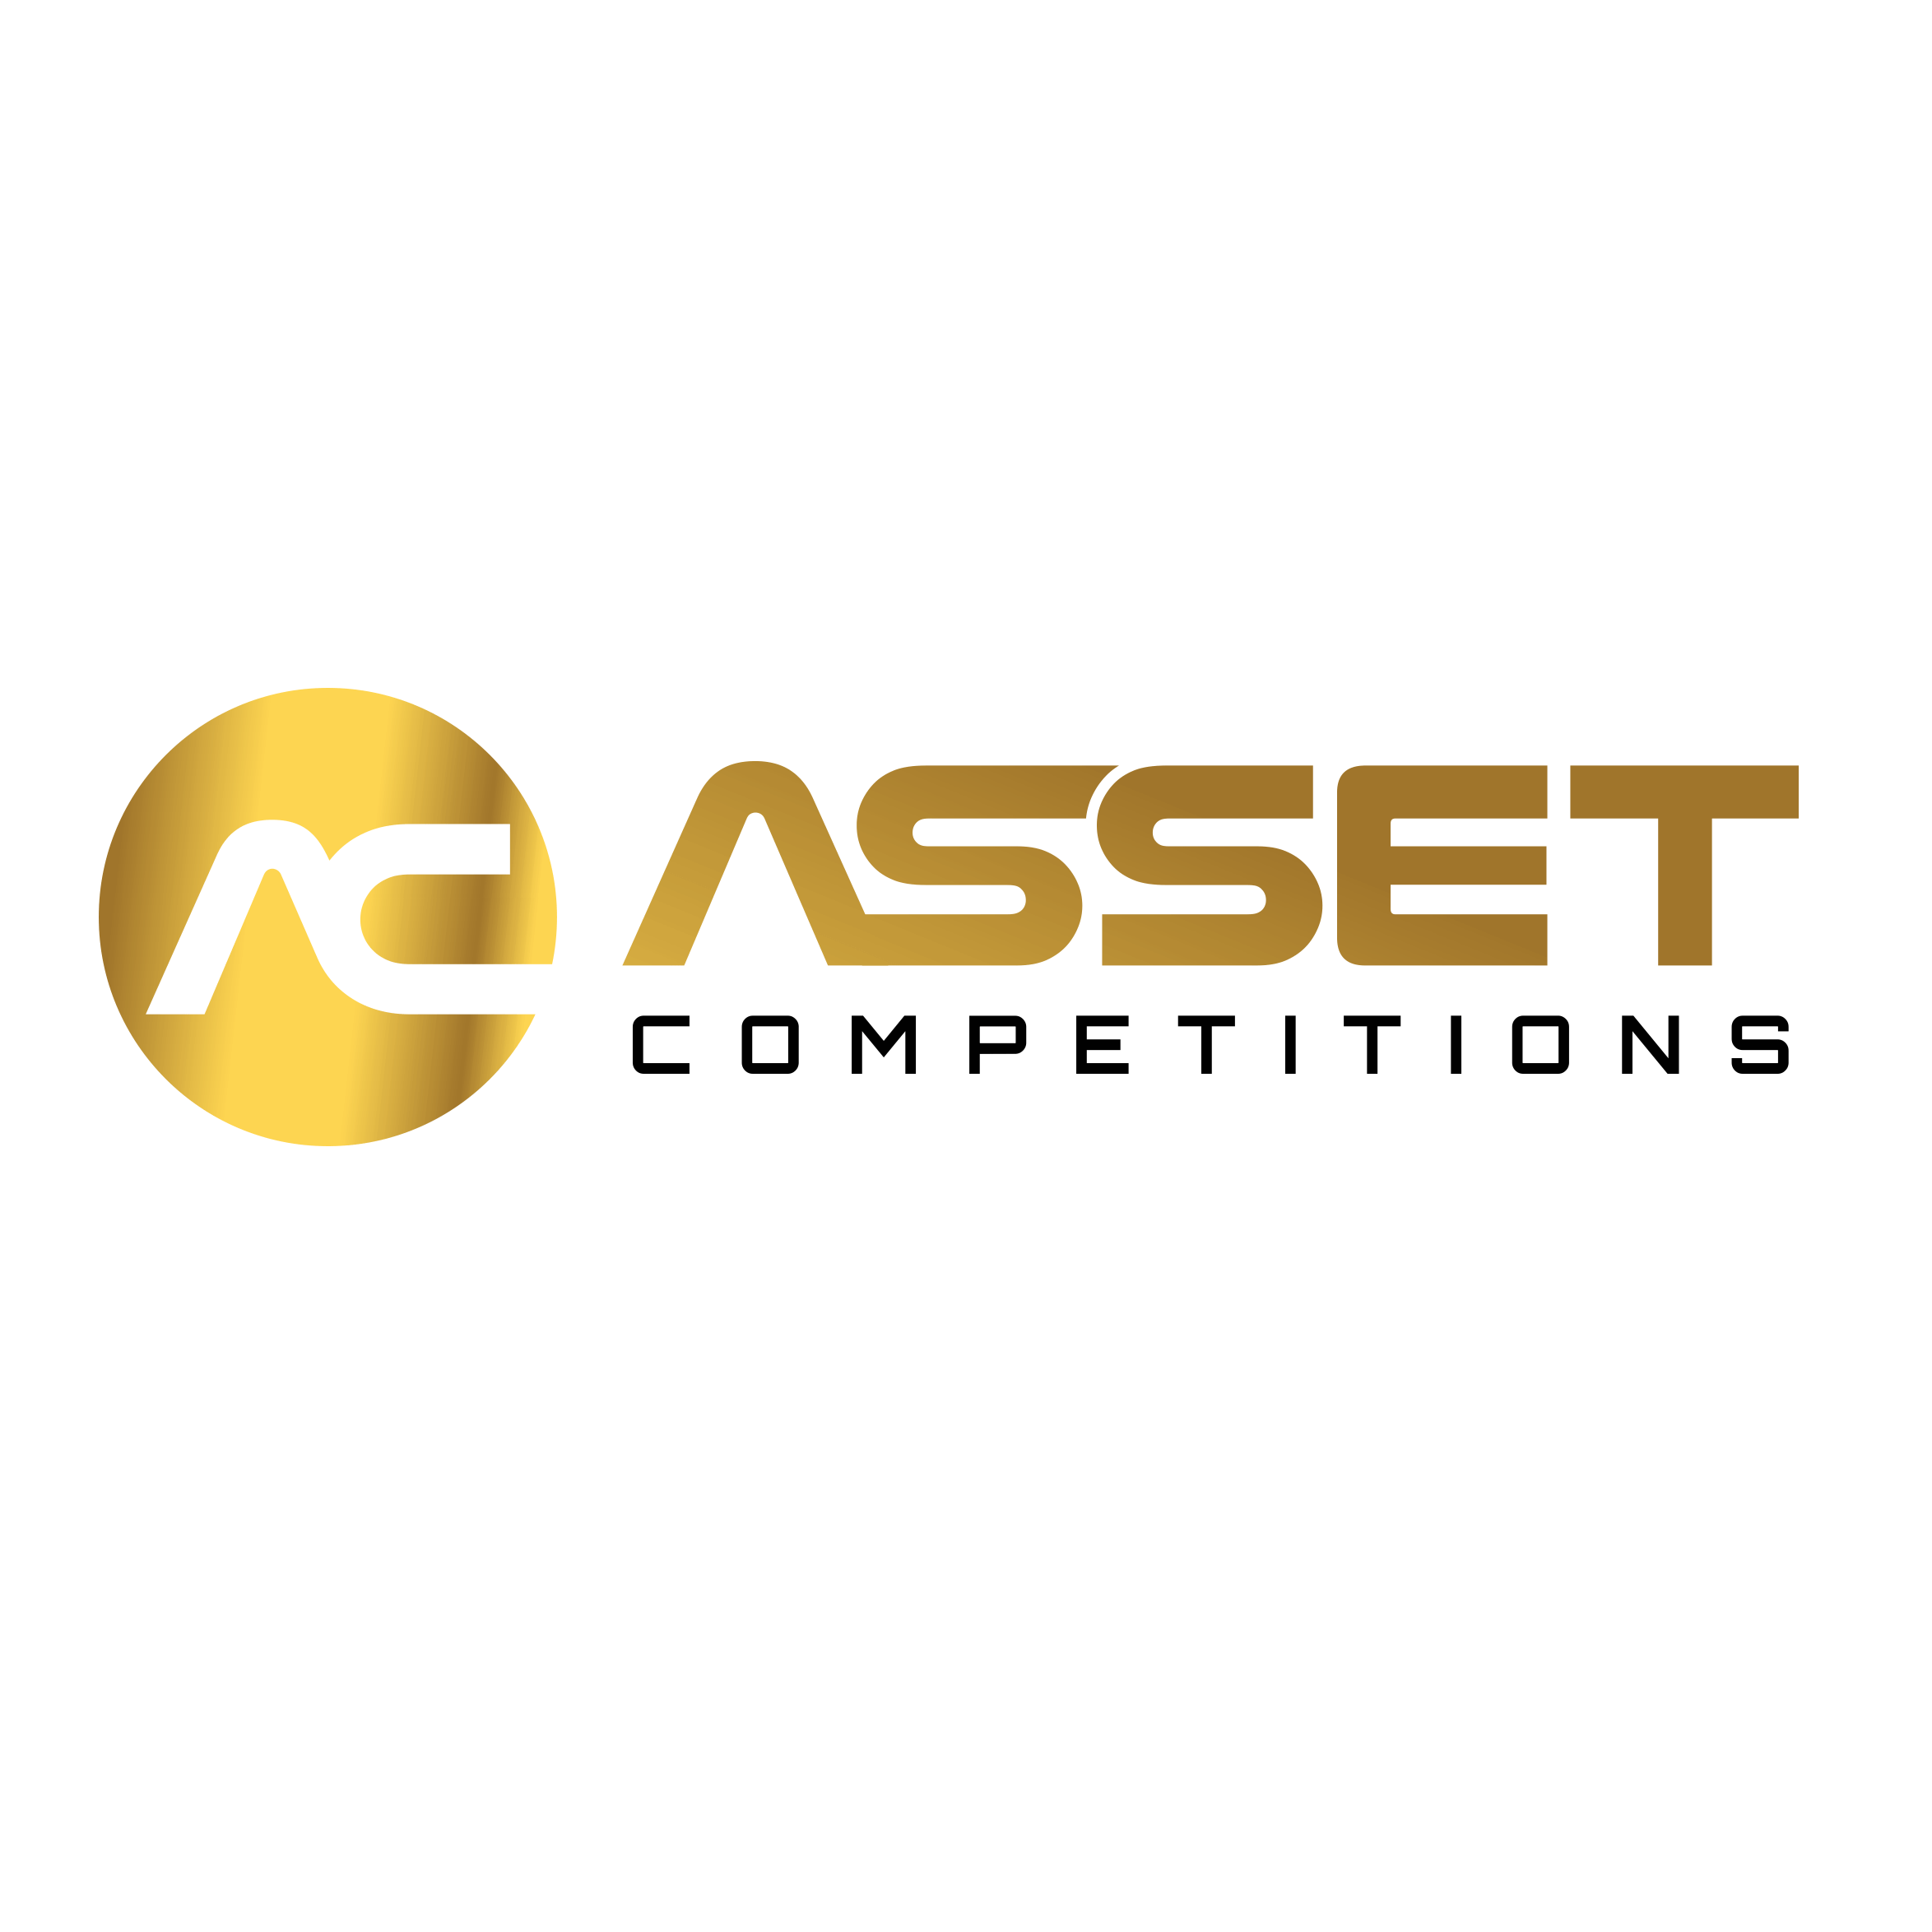 Asset Competitions